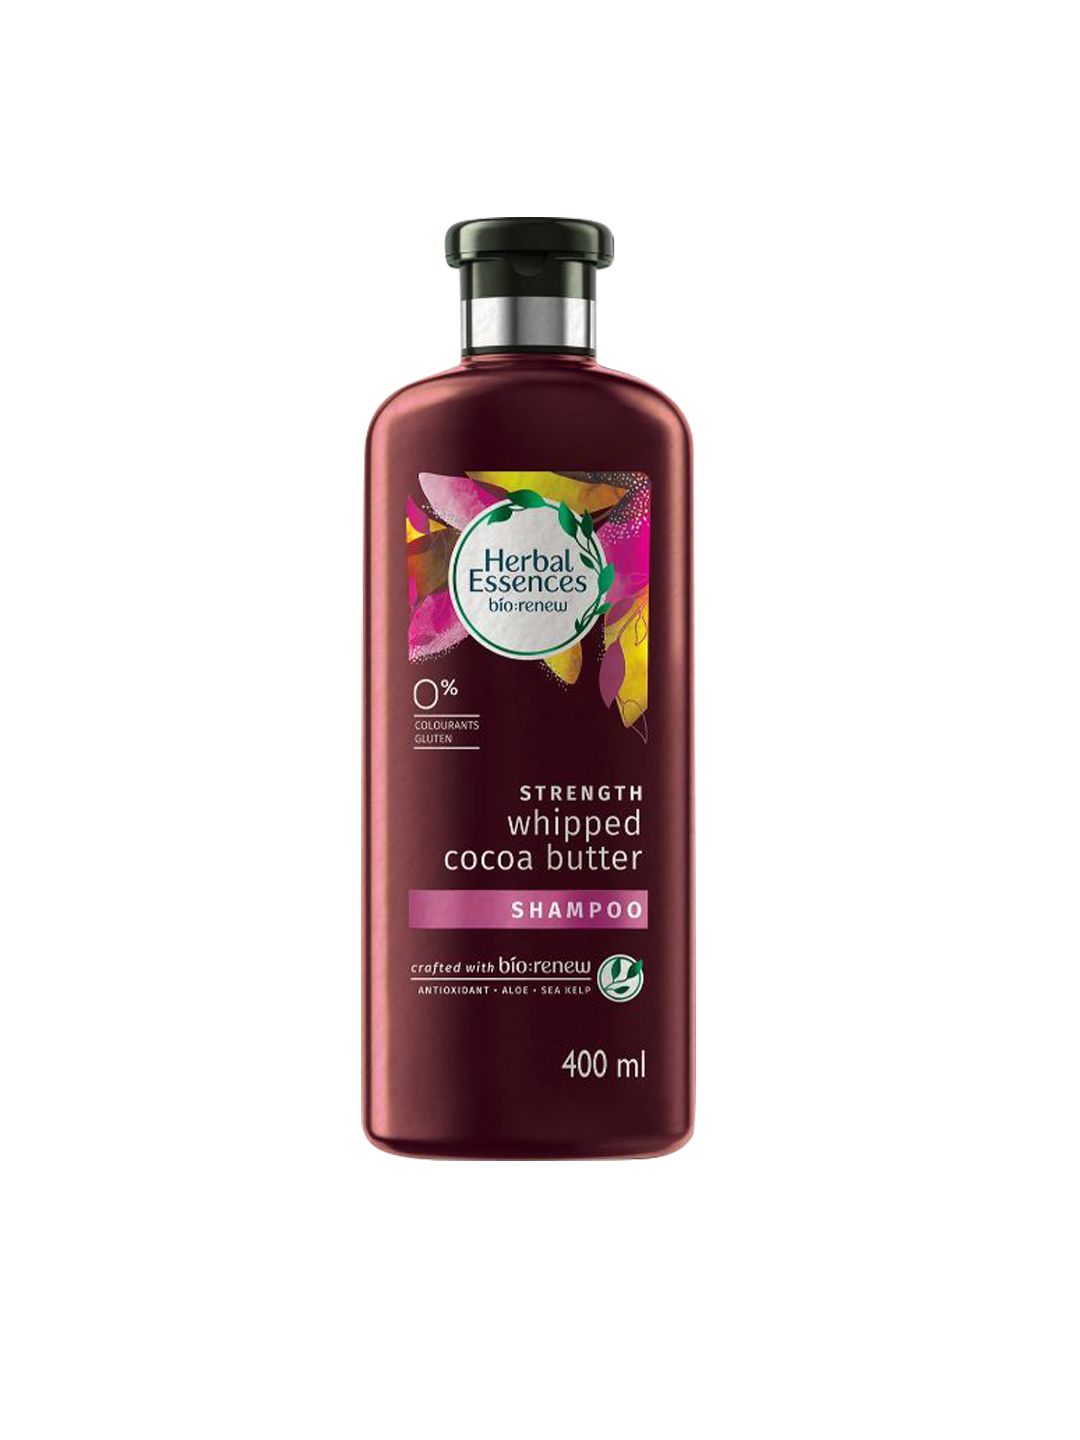 Herbal Essences Bio Renew Unisex Strength Whipped Cocoa Butter Shampoo 400 ml Price in India